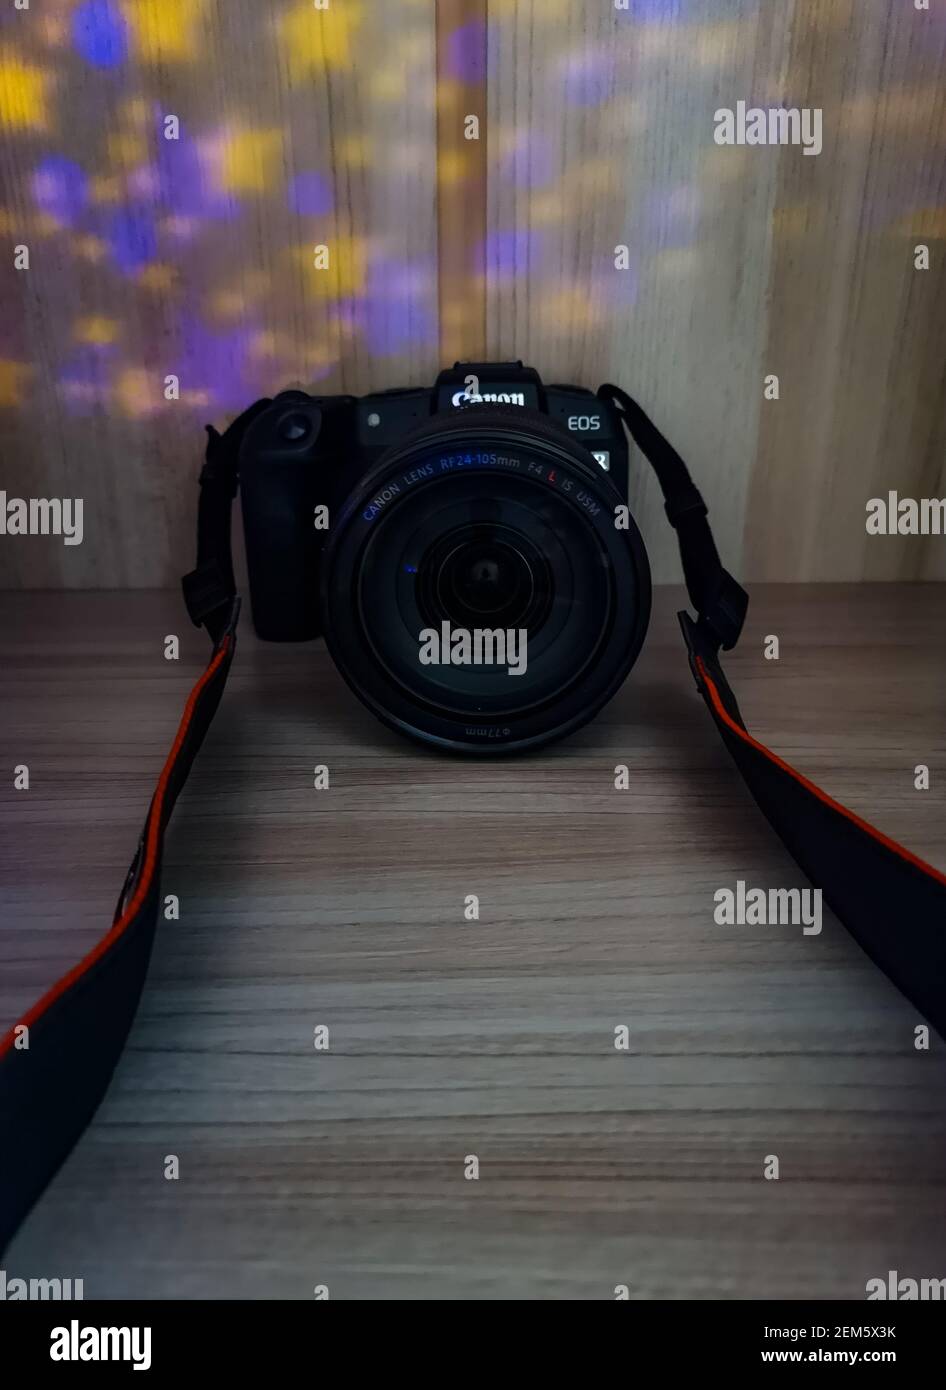 Wroclaw, Poland - April 28 2020: Canon RP camera with lens 24-105 f4 on wooden board highlighted with colorful lights Stock Photo